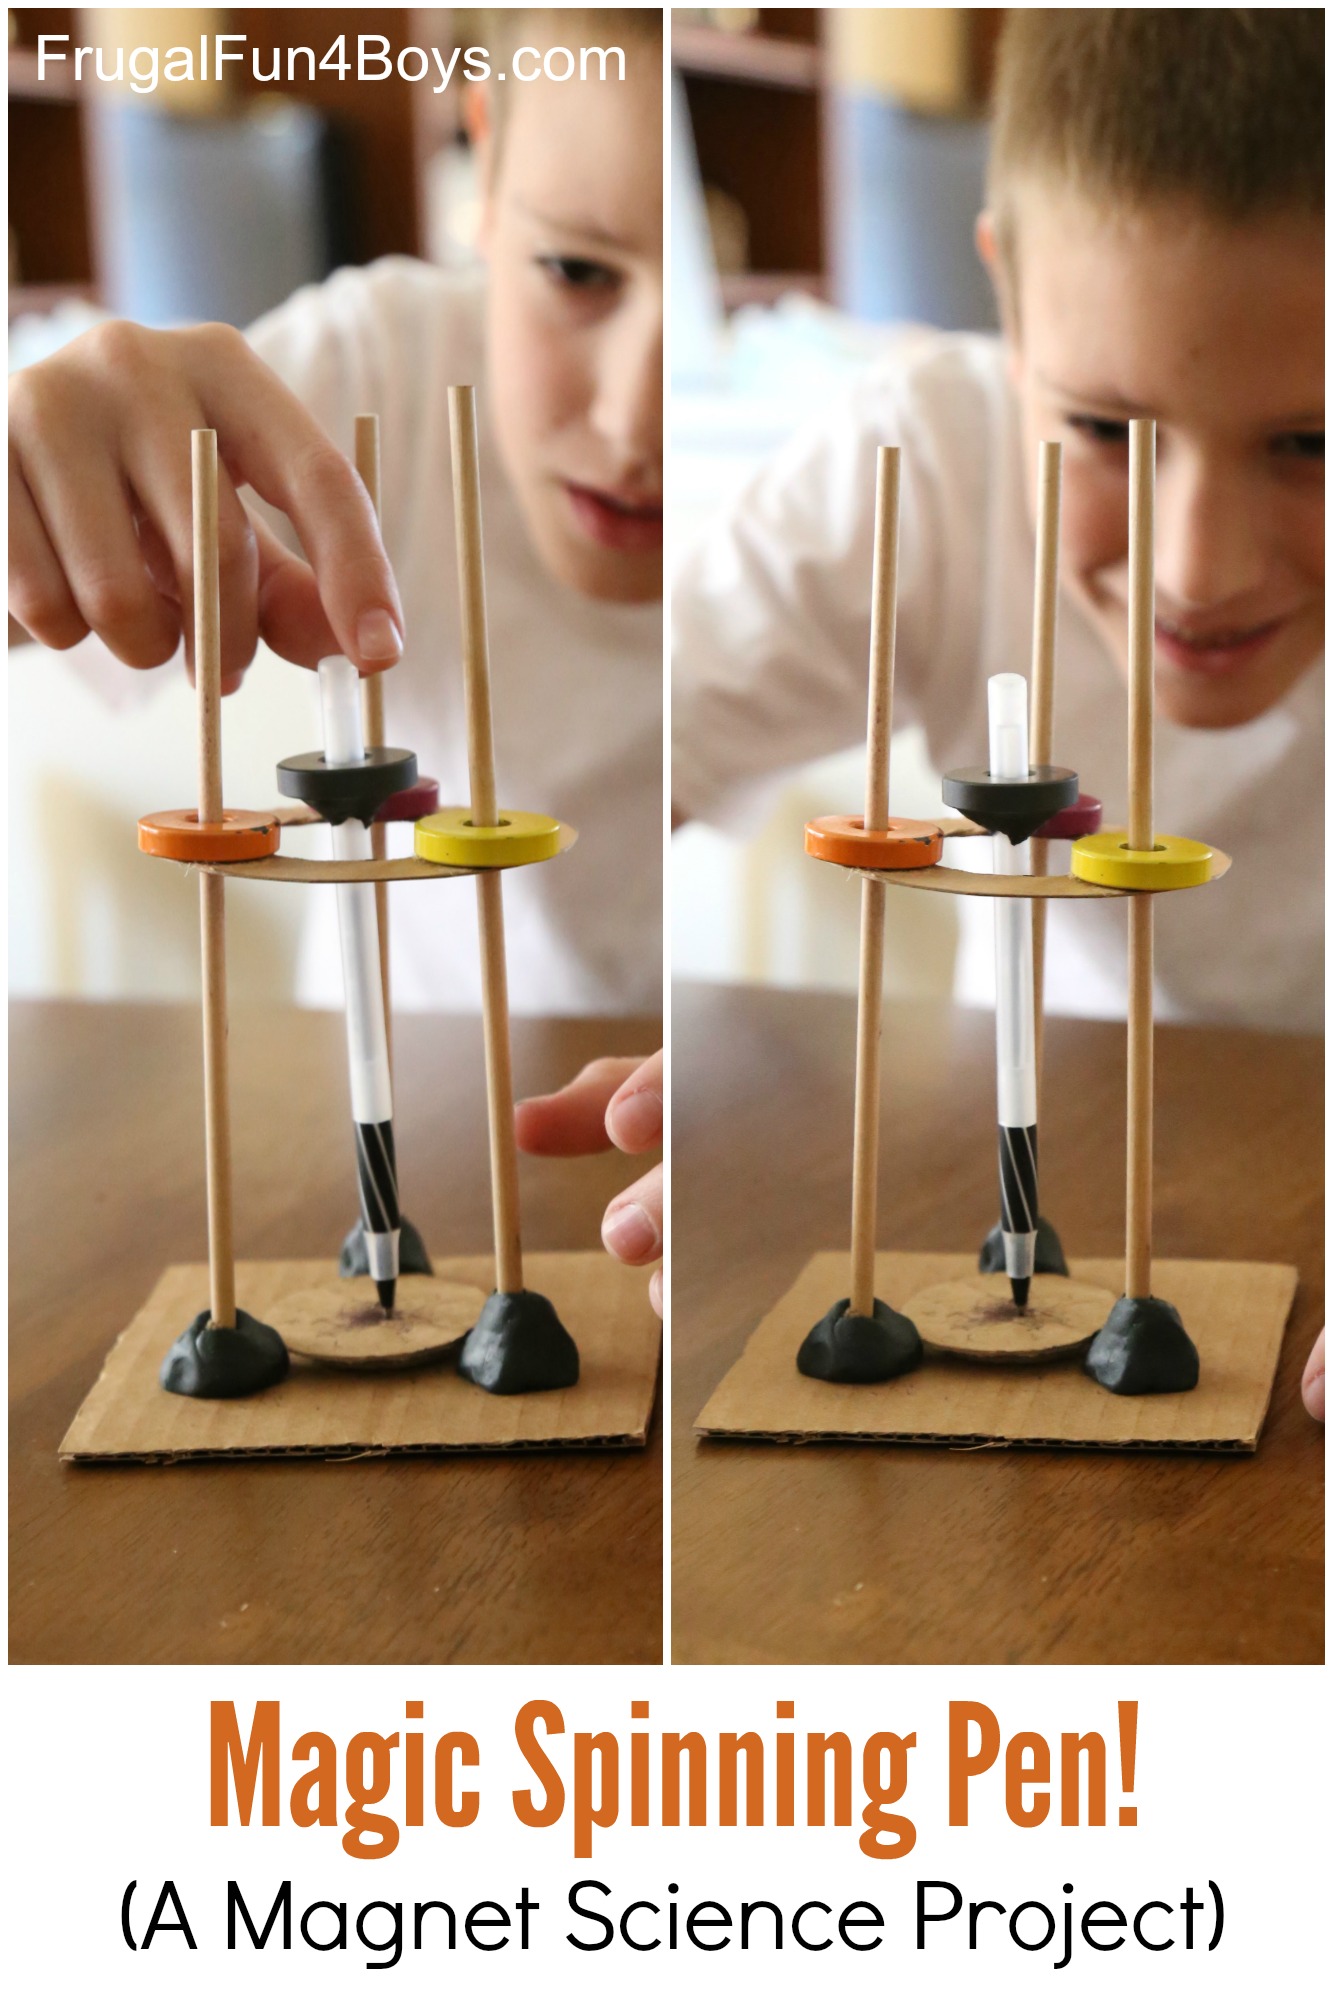 Magic Spinning Pen - A Magnet Science Experiment for Kids!